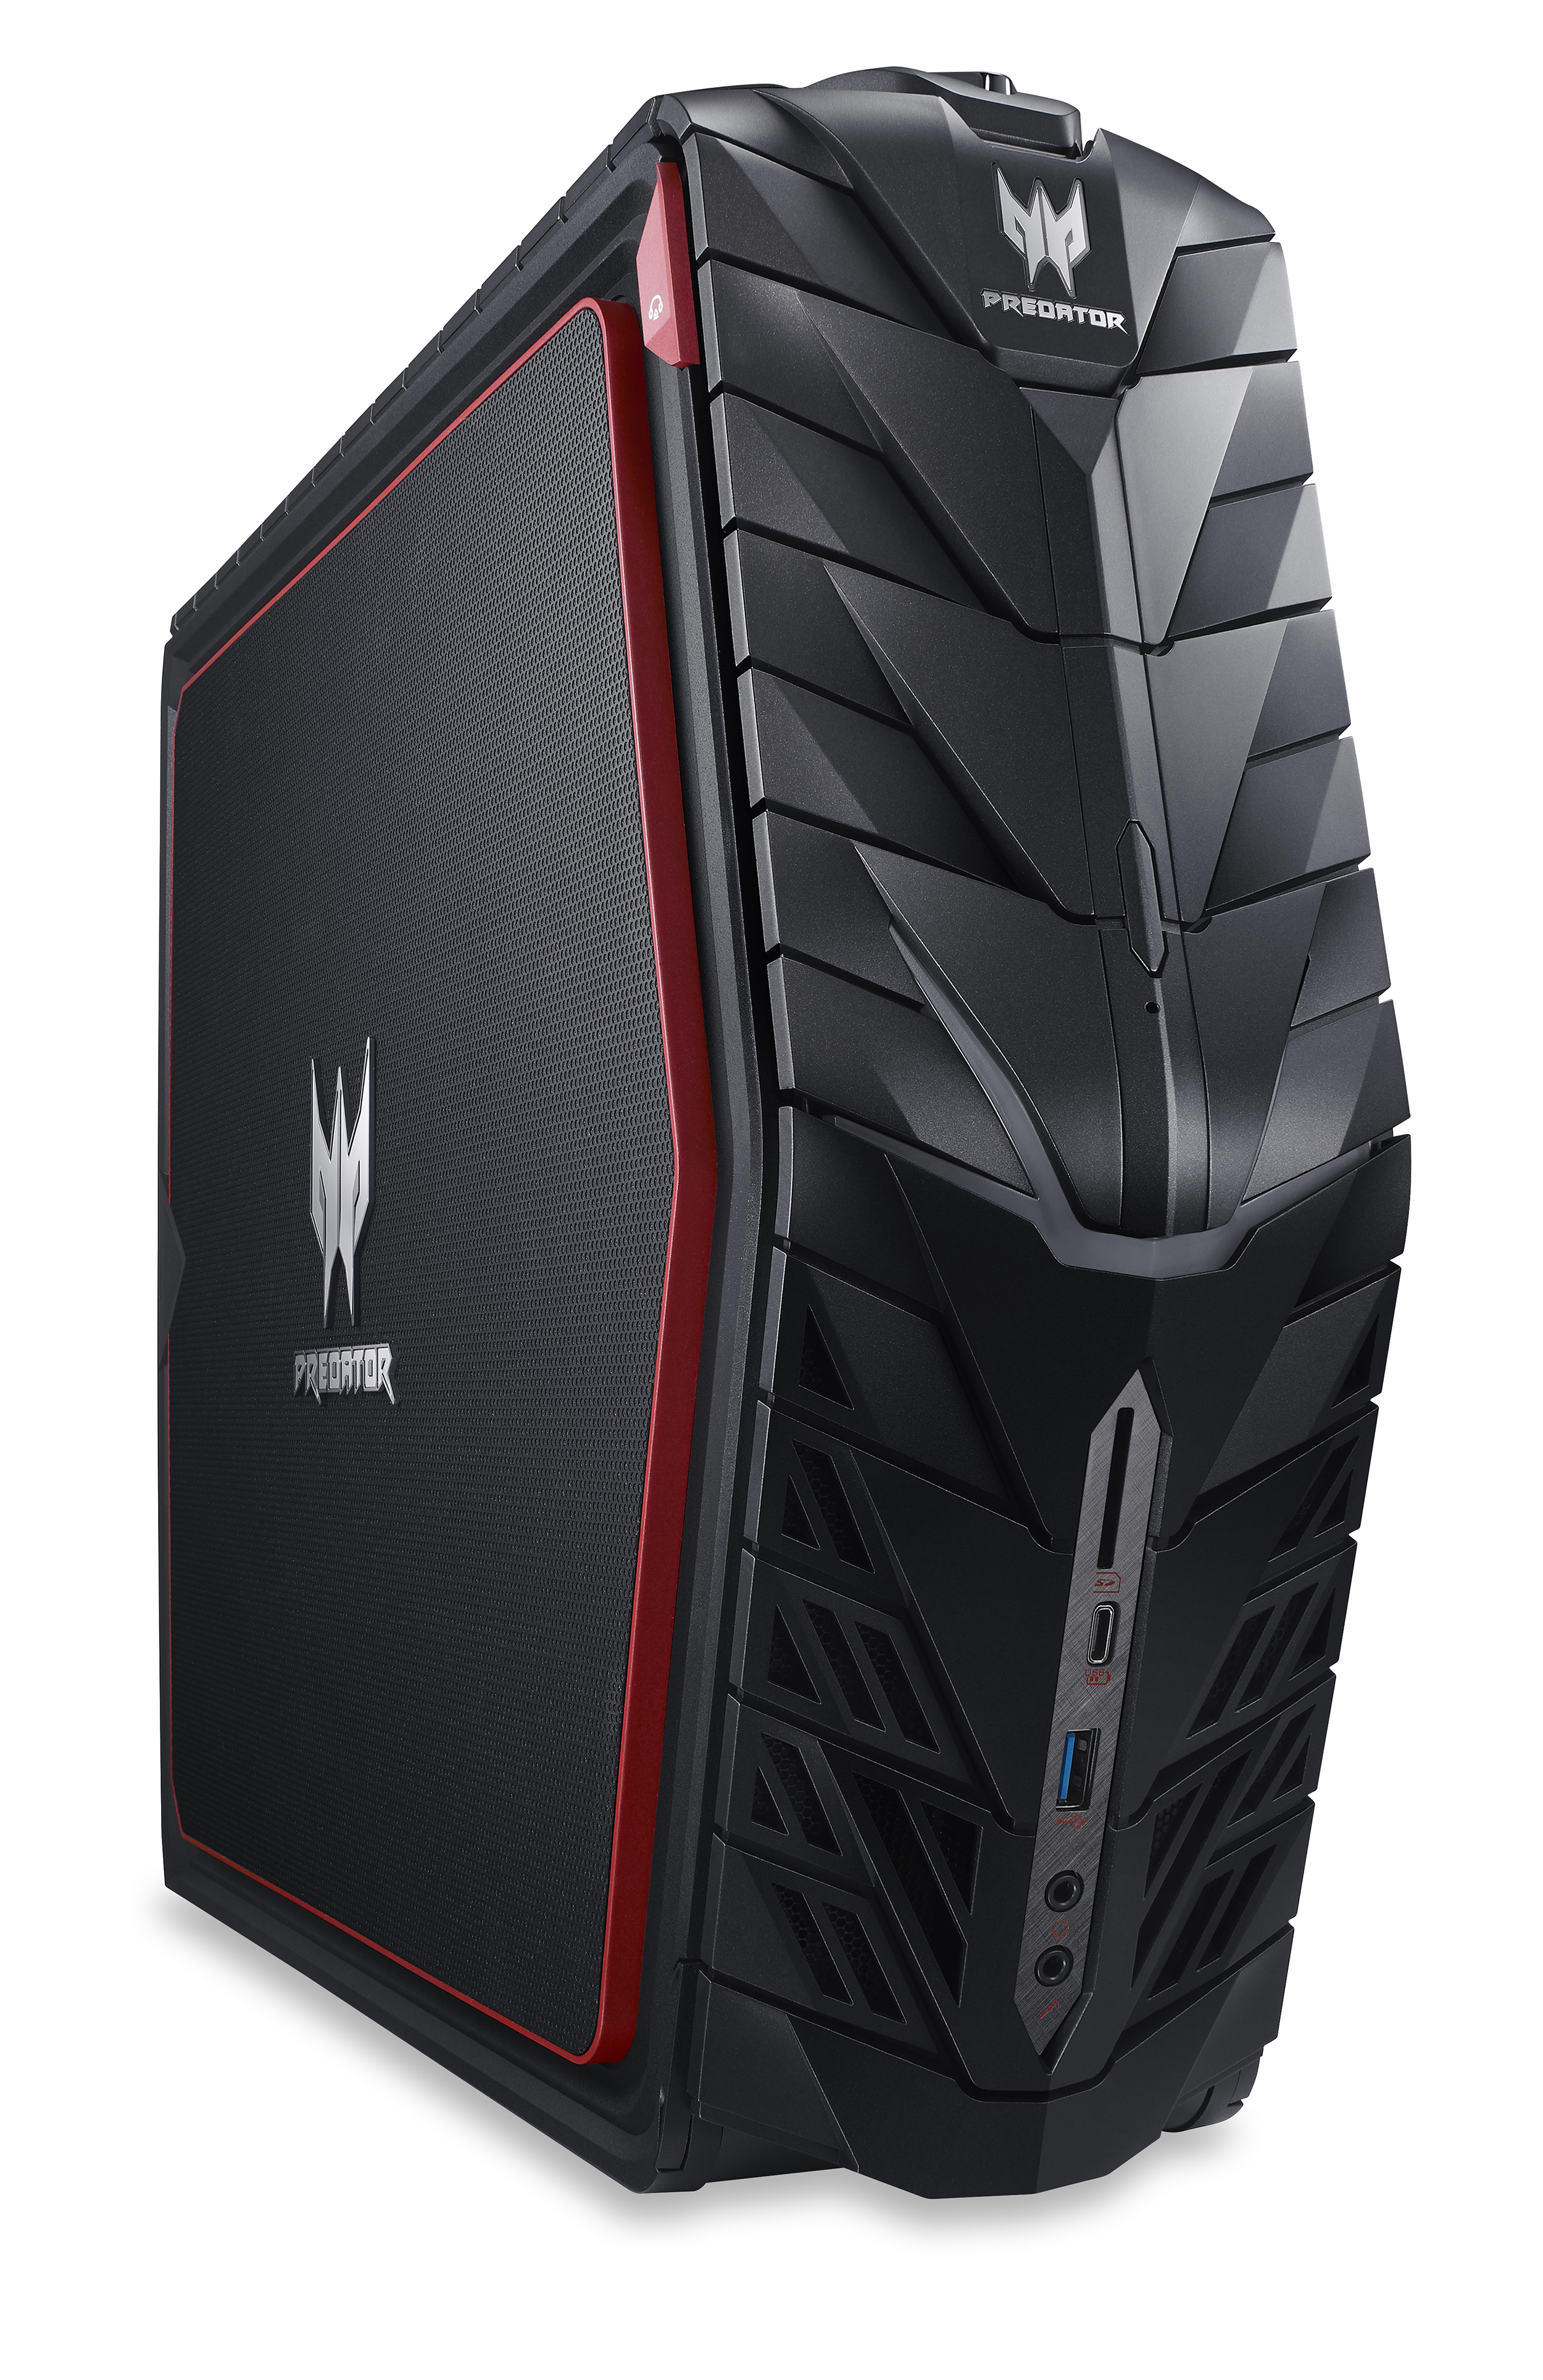 The Acer Predator G1 with Windows 10